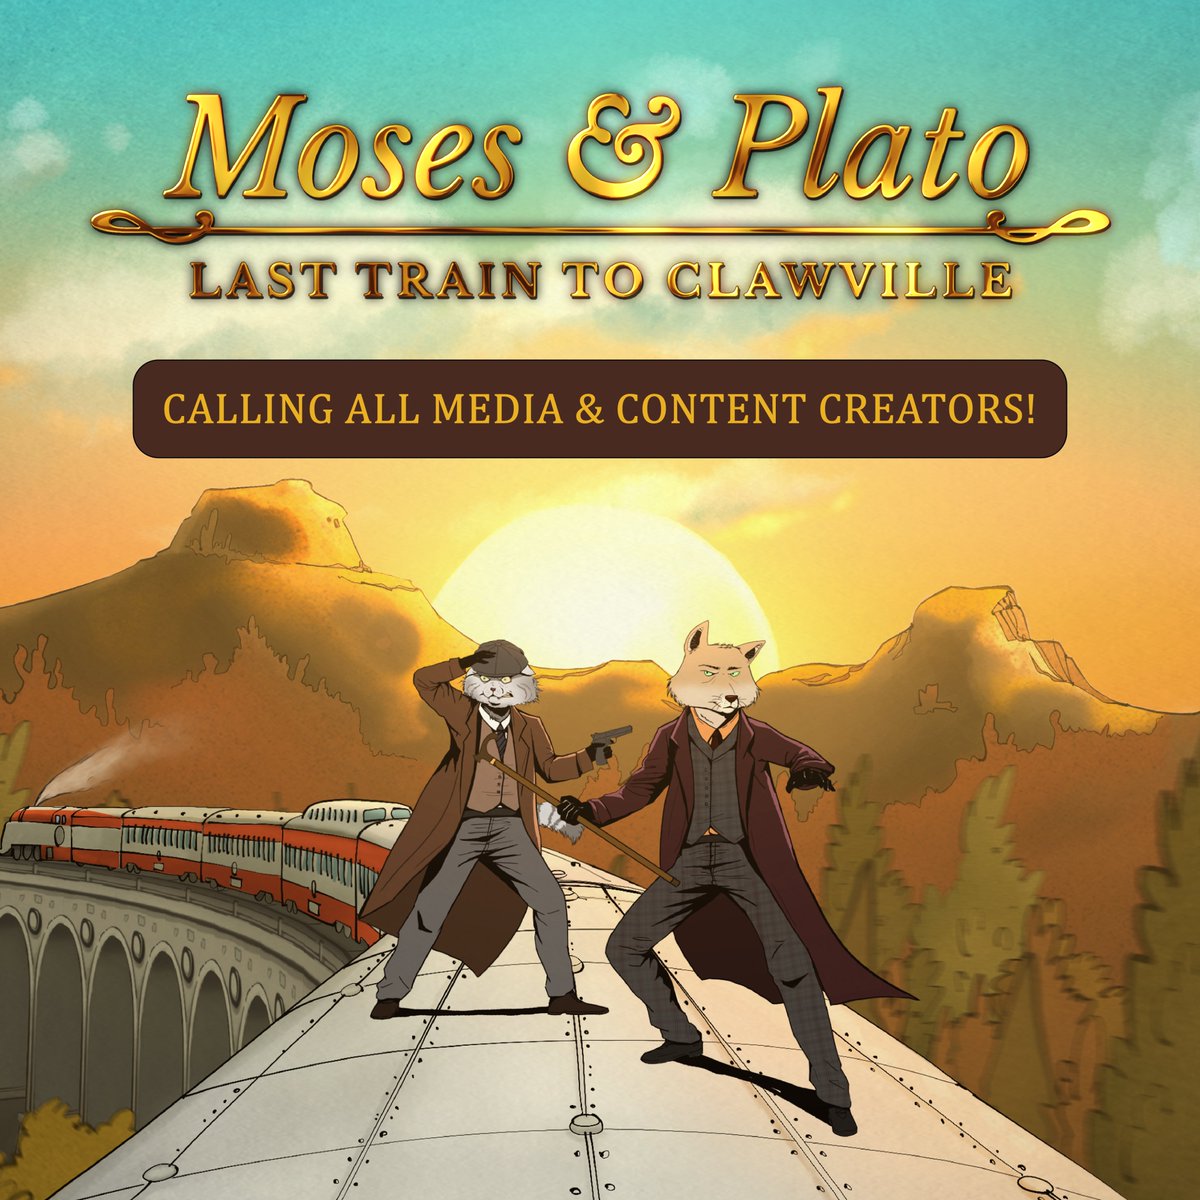 Hello, all game content creators and journalists!✨ We have been brewing @mosesandplato with @TWGdevstudio and we want to share exciting news about the game! 🌱 Fill out this form to participate! 🦊 bit.ly/mosesmedia